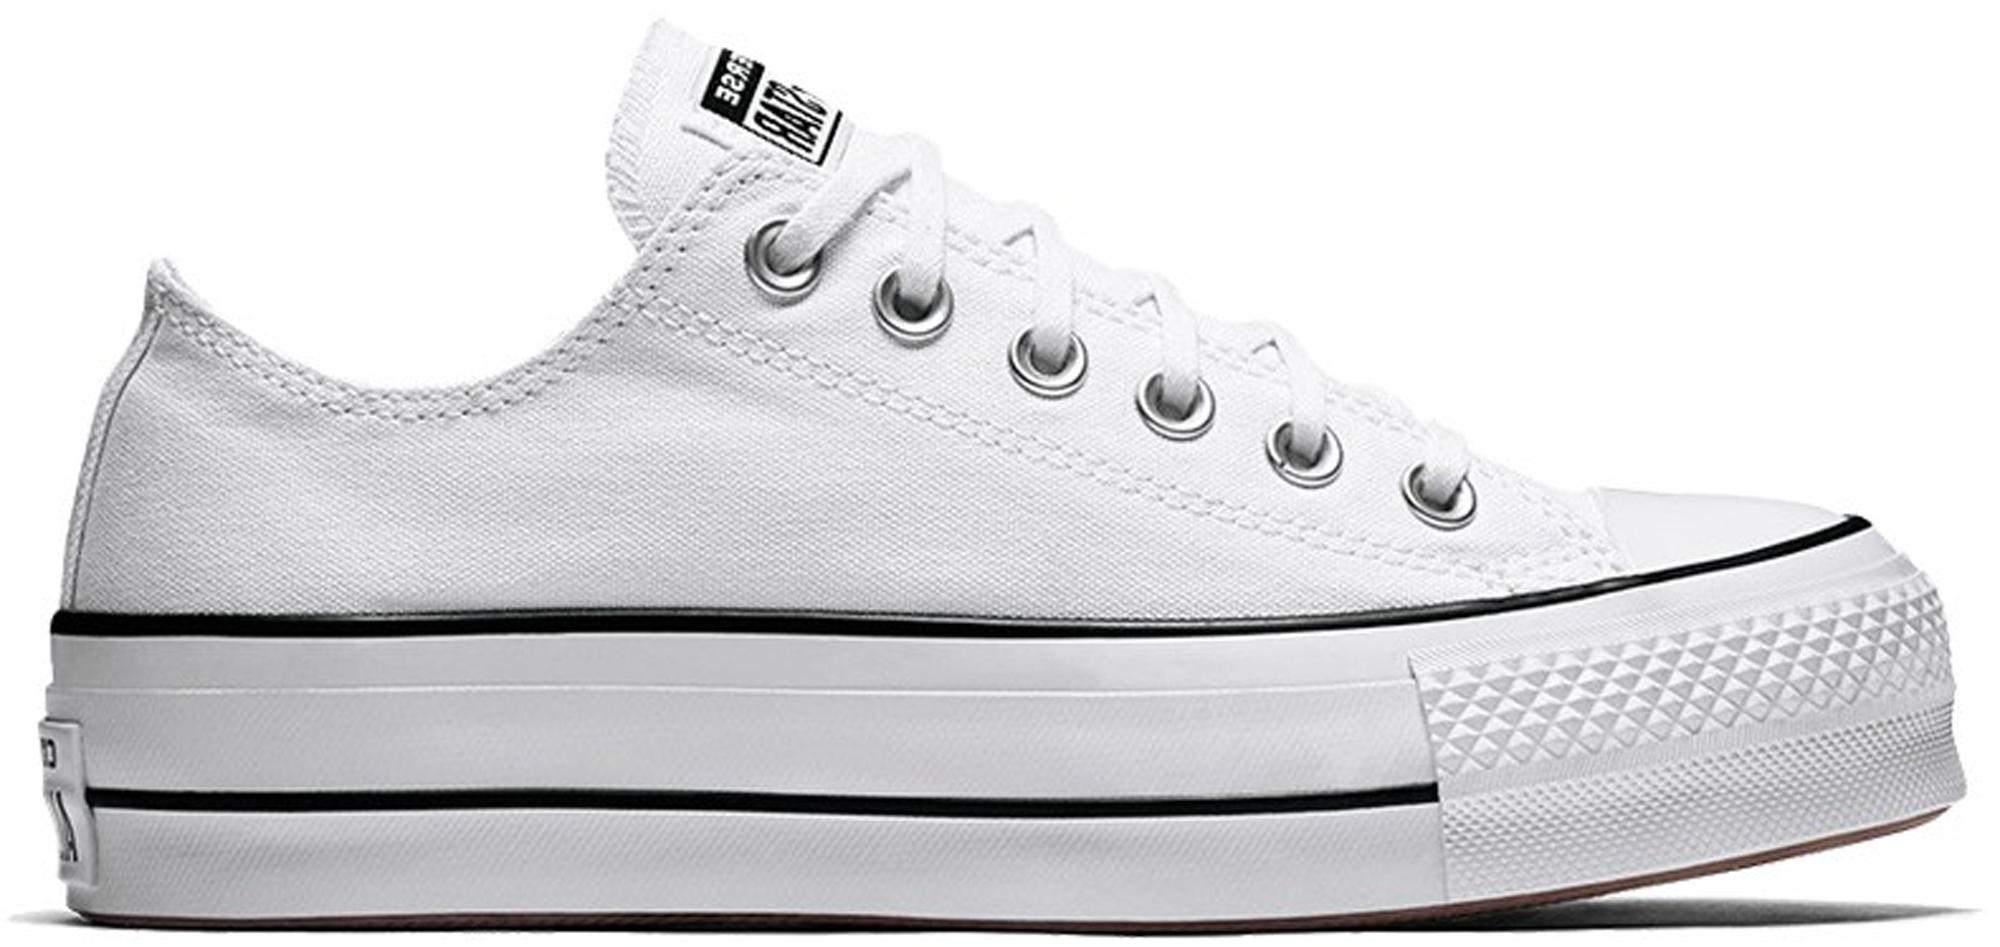 chuck taylor all star lift ox white